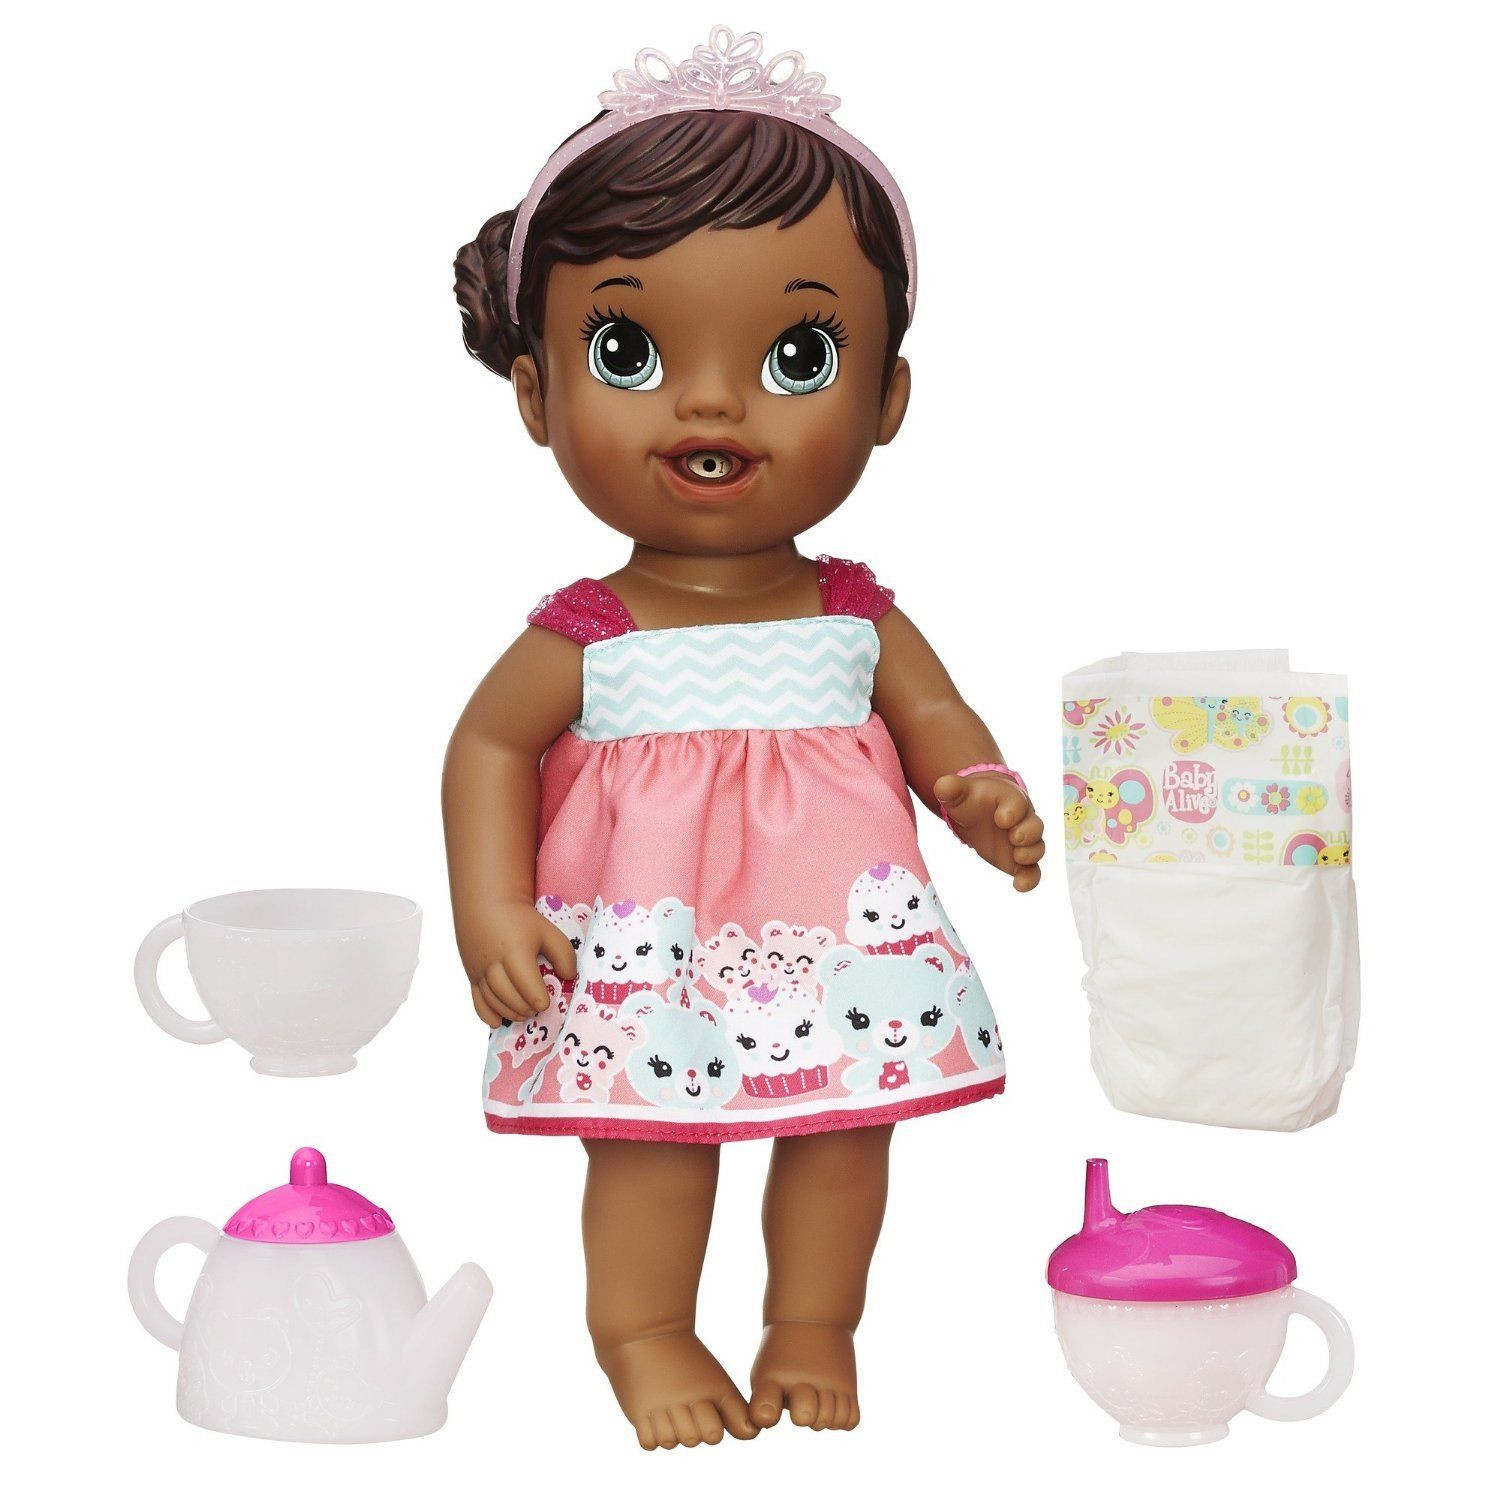 Baby Alive Tea Party Doll
 Baby Alive Lil Sips Teacup Surprise Baby Has A Tea Party